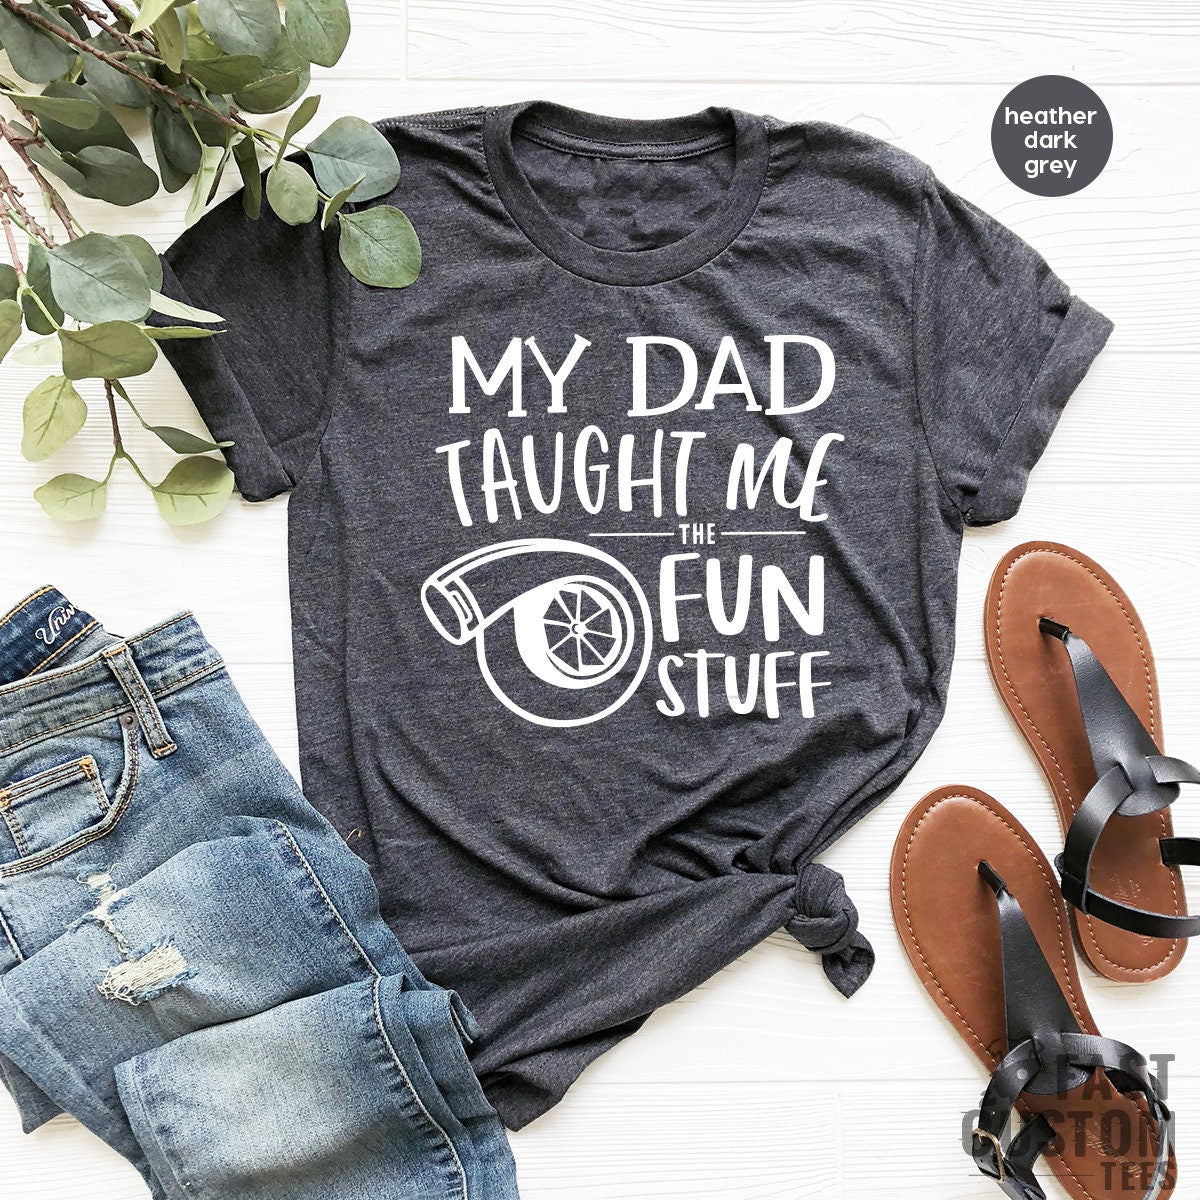 Turbo Baby Shirt, Car Baby Bodysuit, My Dad Taught Me Fun Stuff, Racer Baby Shirt, Racing Baby Bodysuit, Funny Baby Tee, Gift From Dad - Fastdeliverytees.com